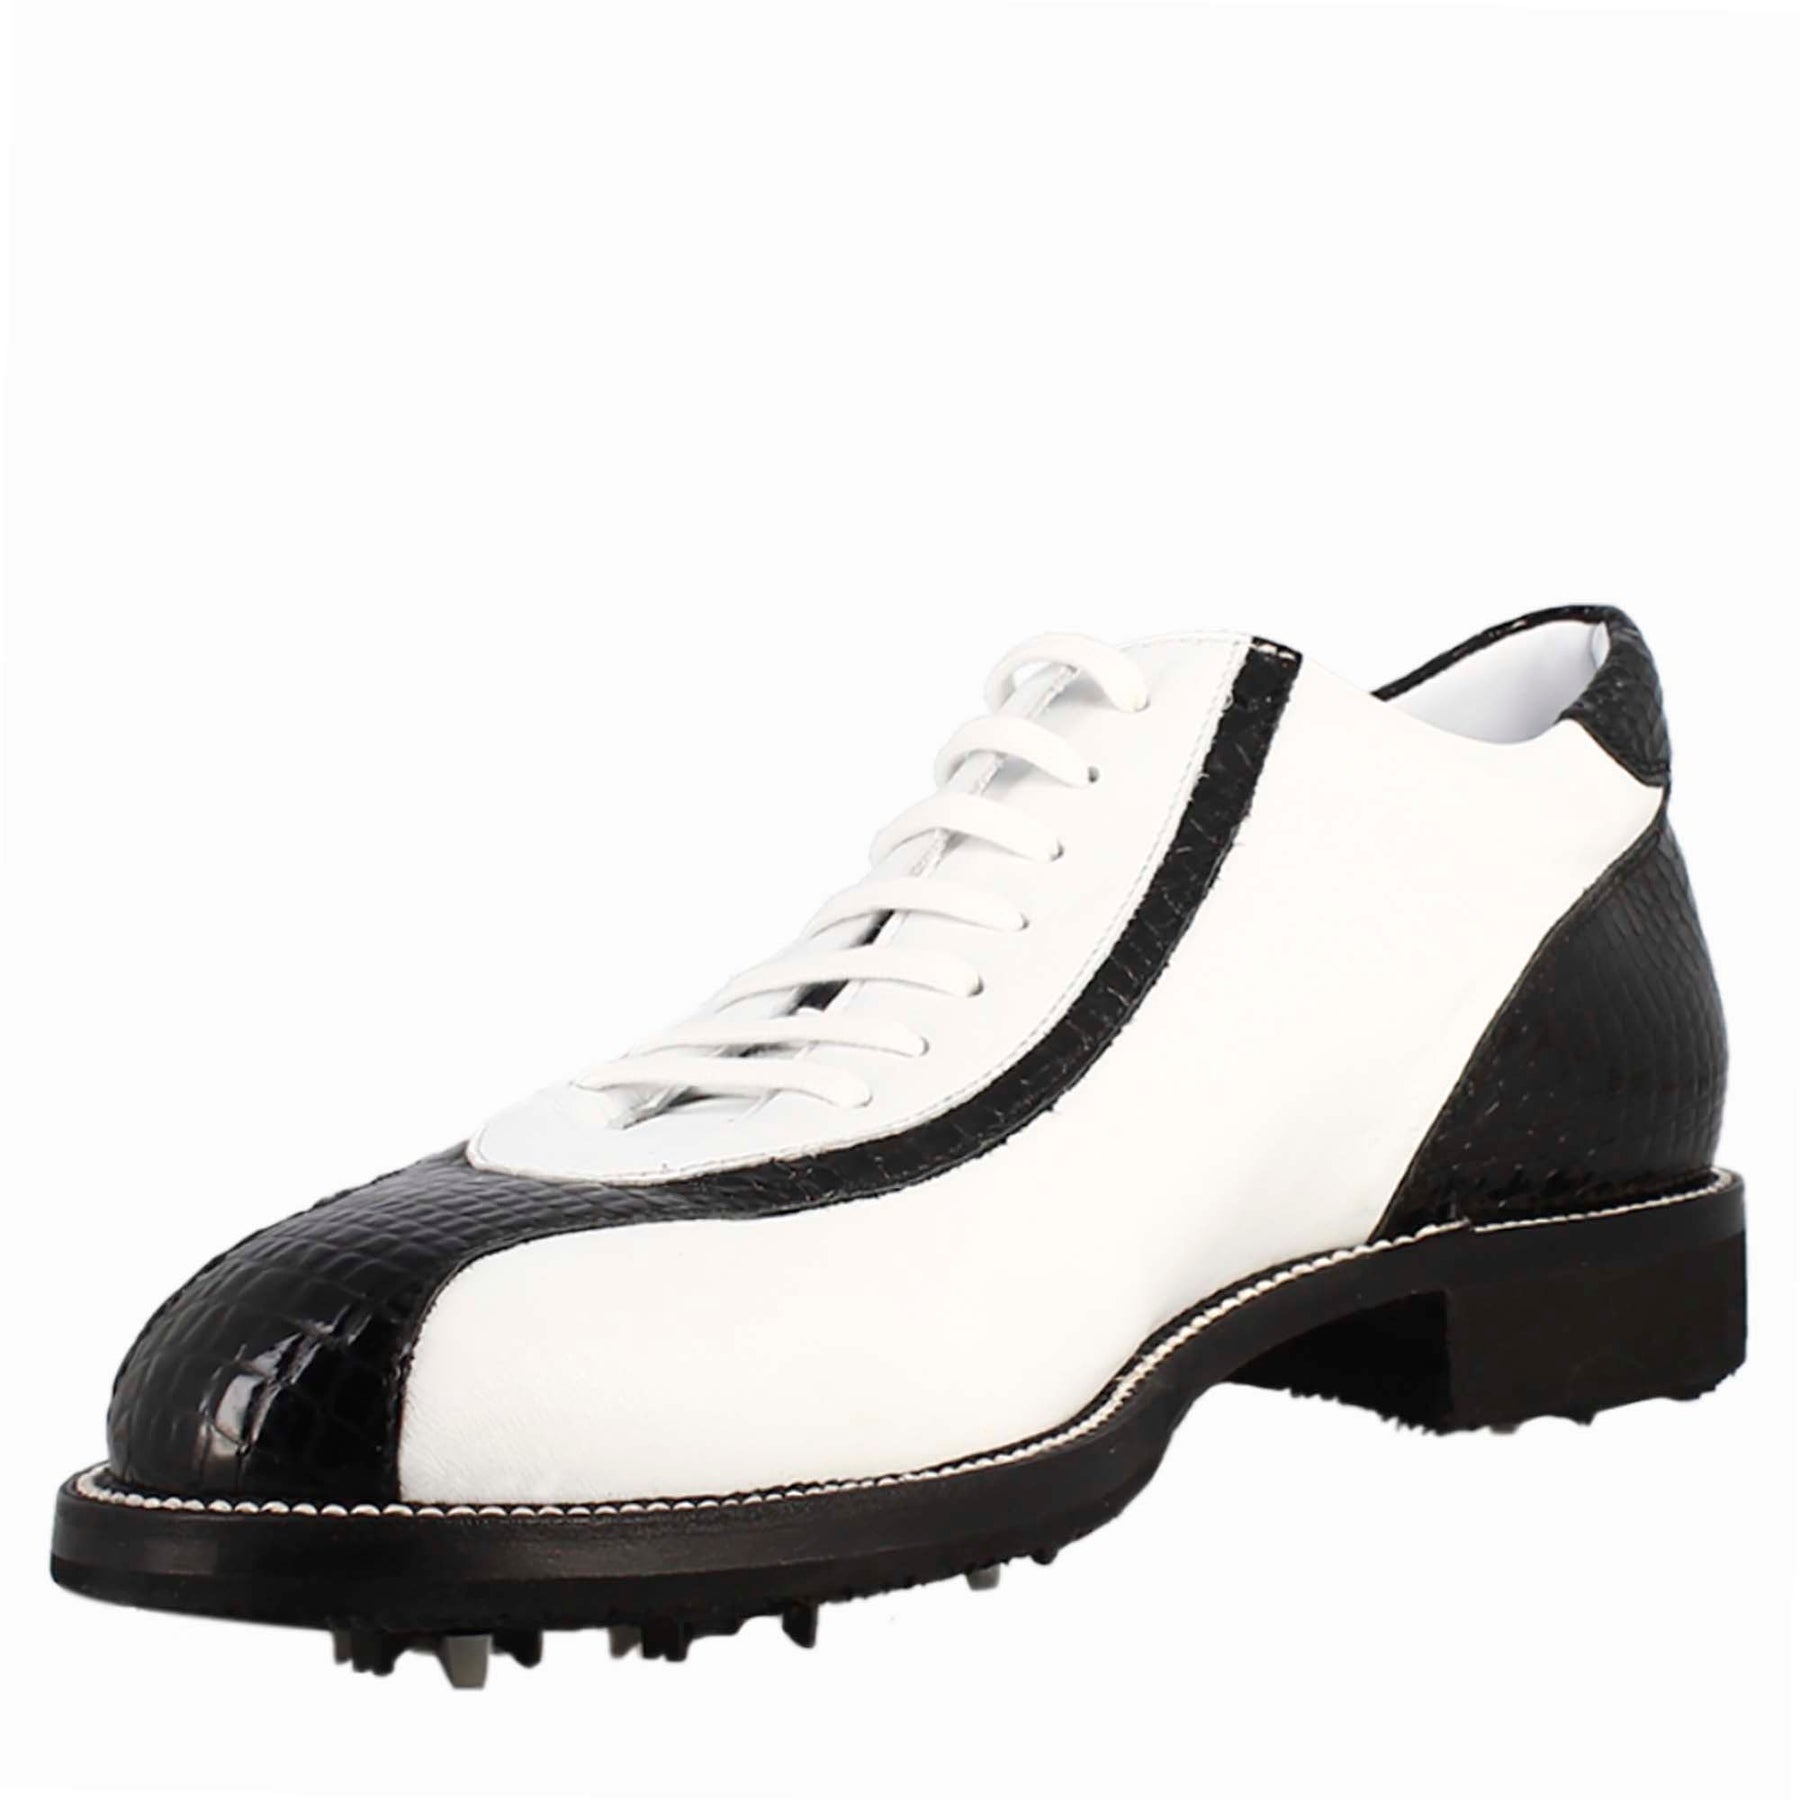 Handcrafted men's golf shoes in white leather and black coconut detailing